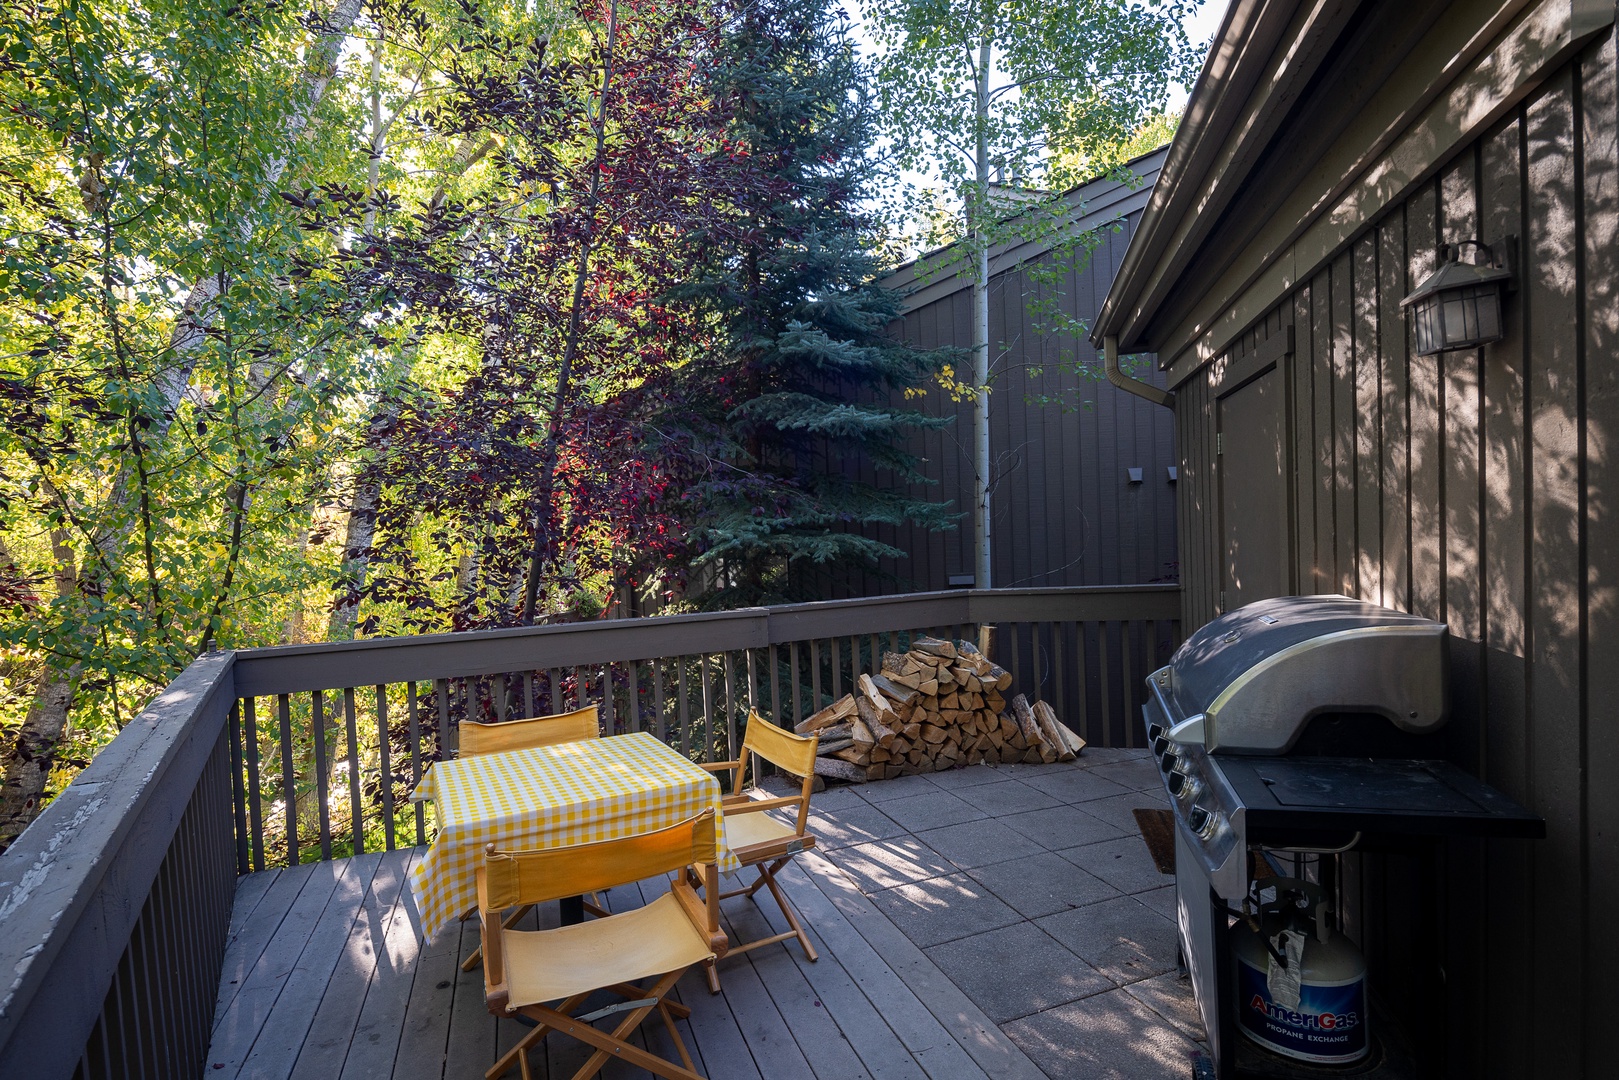 Ketchum Vacation Rentals, Bridgepoint Charm - On the deck, you'll also find a grill and outdoor dining area with seating for 3 and additional firewood